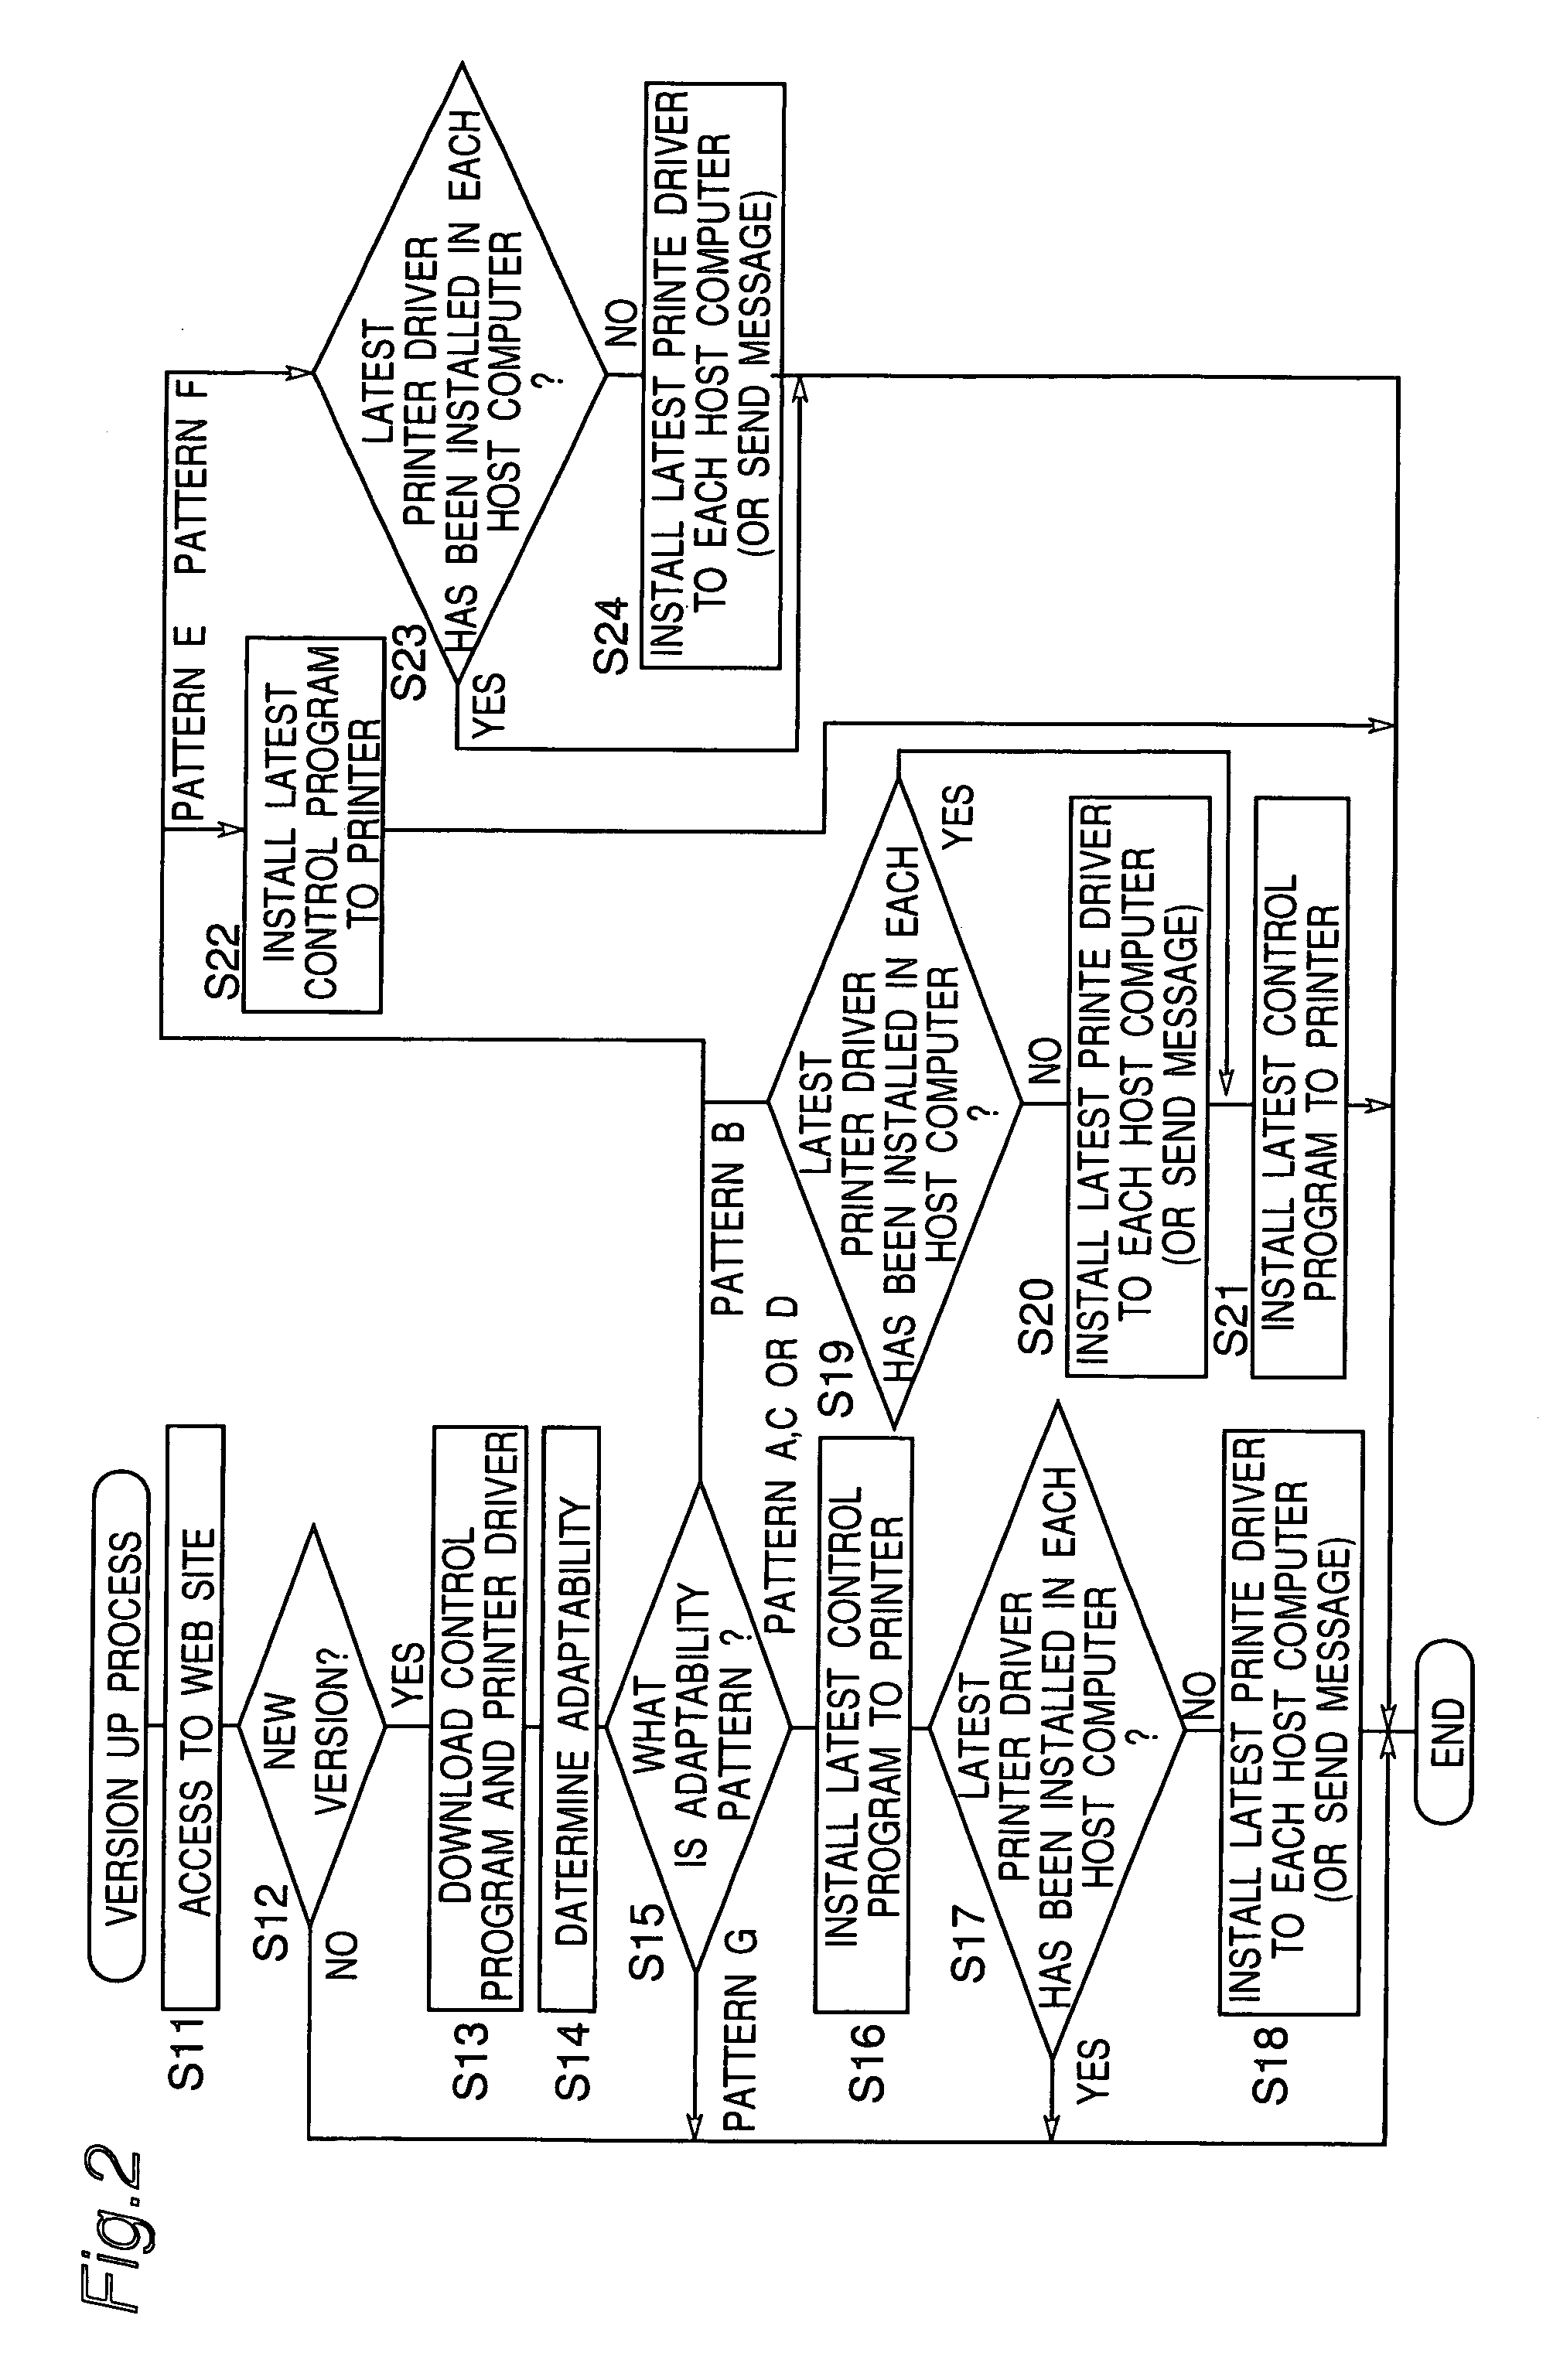 Management device and method of print system for updating software programs installed in the print system